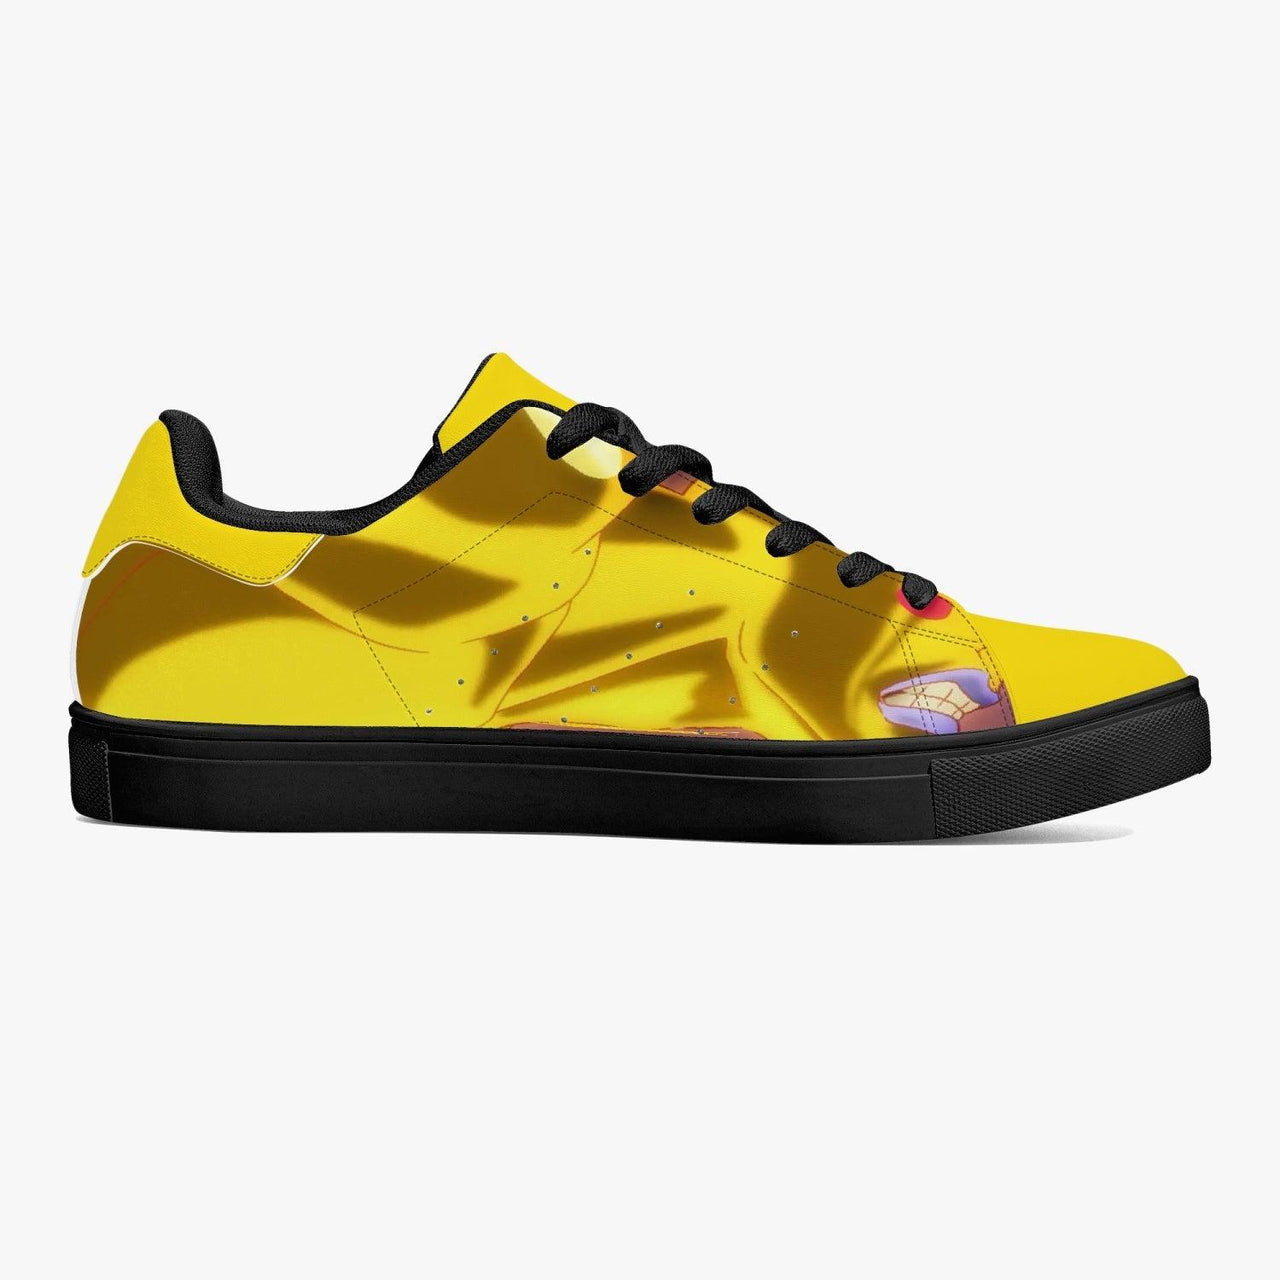 Mob Psycho 100 Golden Dimple Skate Anime Shoes _ Mob Psycho 100 _ Ayuko